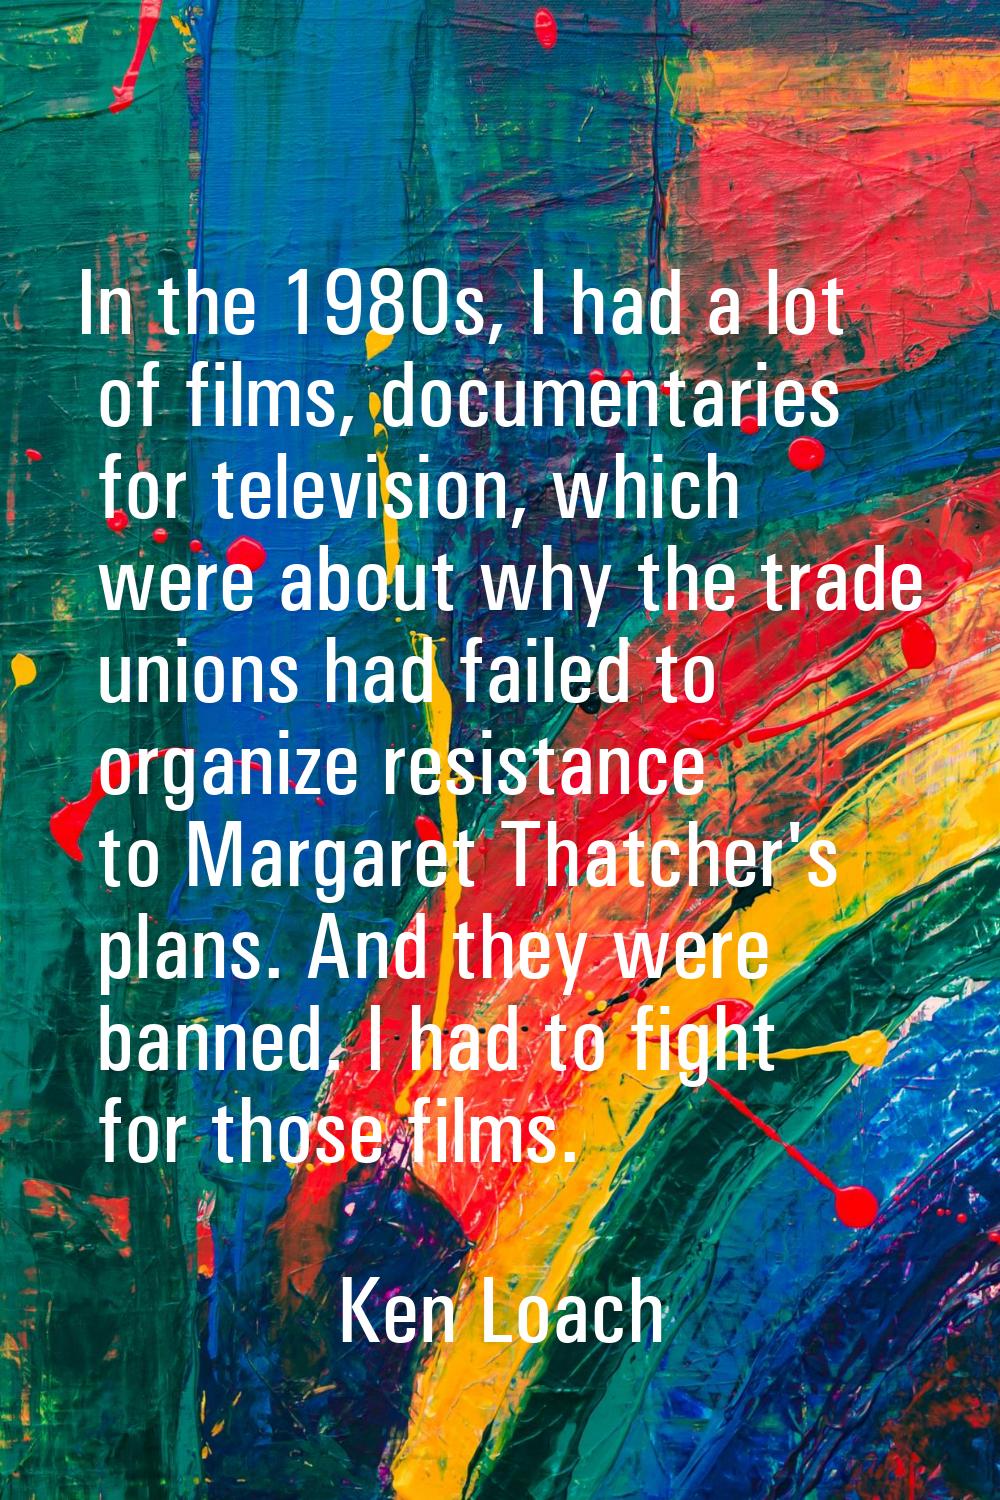 In the 1980s, I had a lot of films, documentaries for television, which were about why the trade un